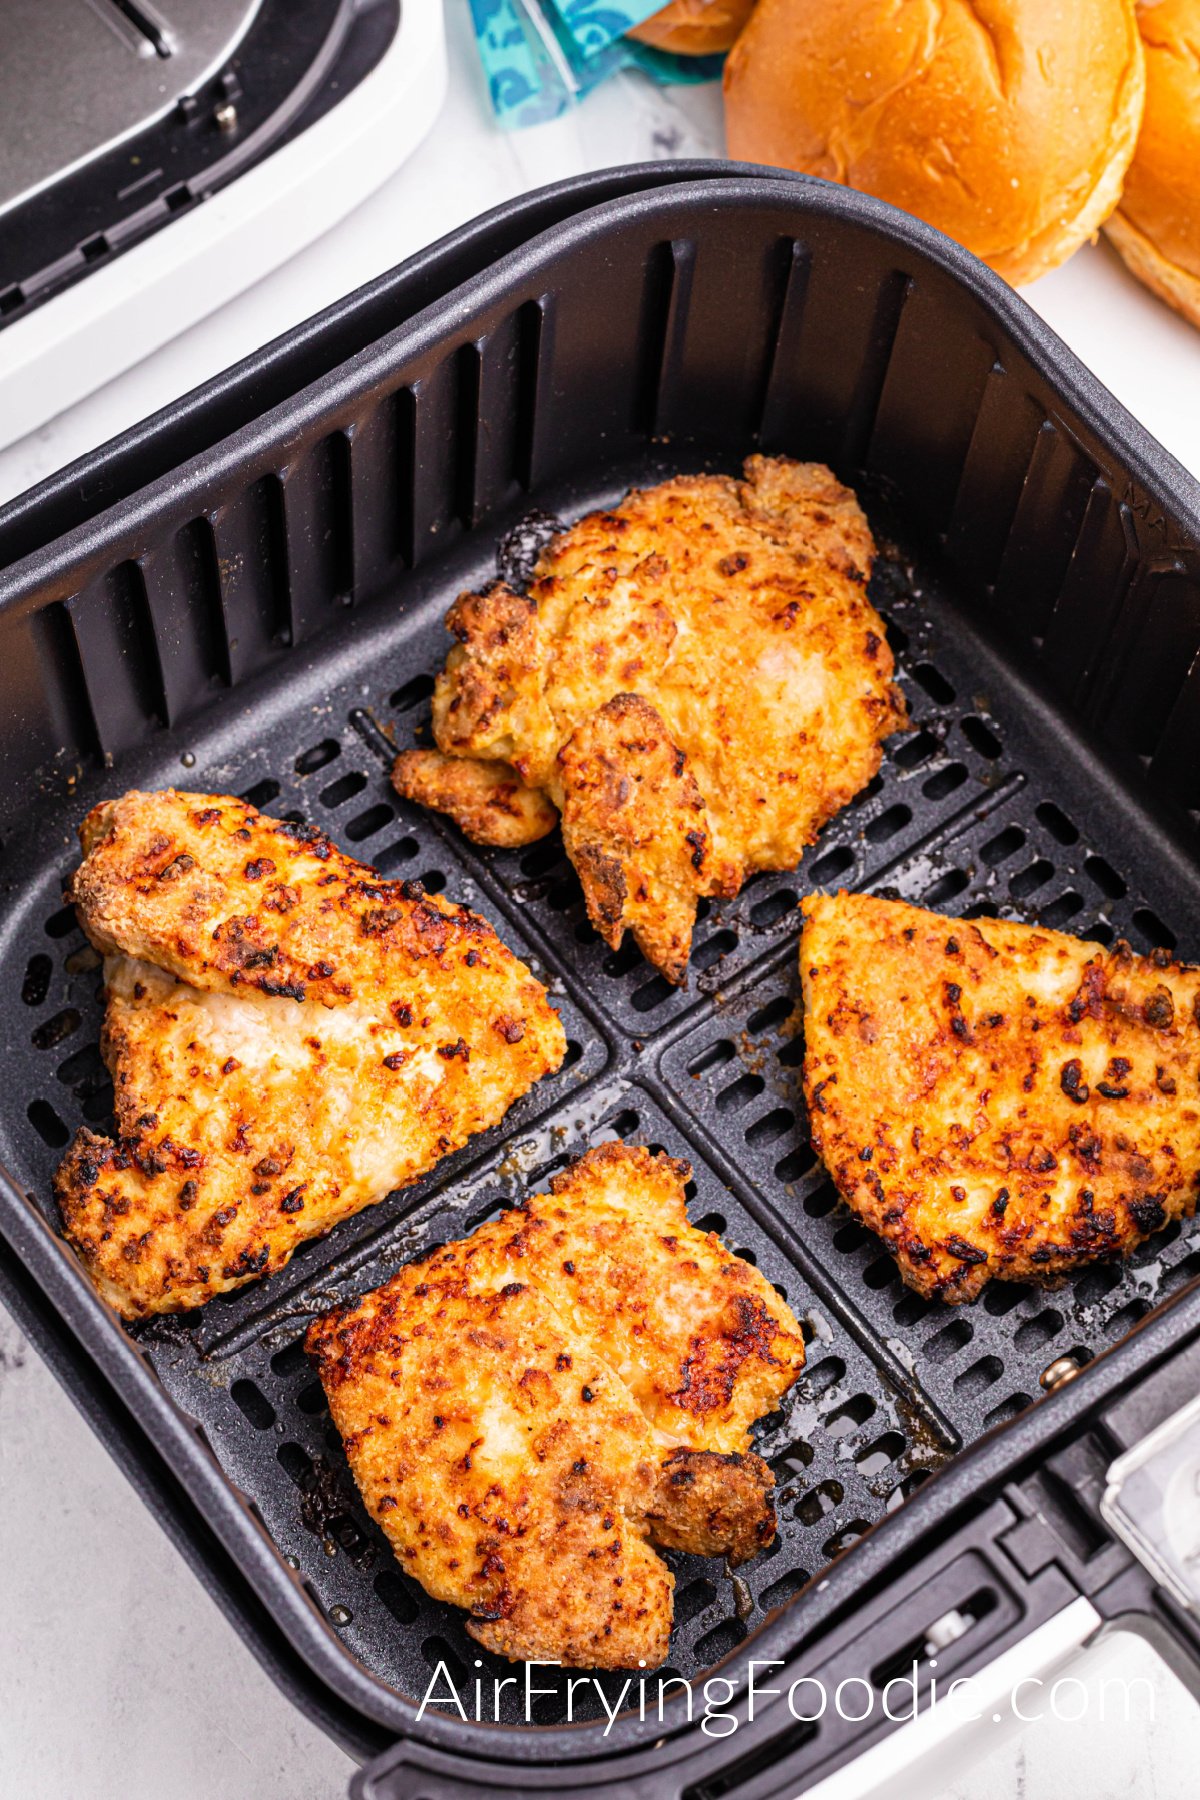 A picture of four pieces of chicken halfway cooked in the air fryer basket before flipping over. The hamburger buns are at the top right corner of the picture.